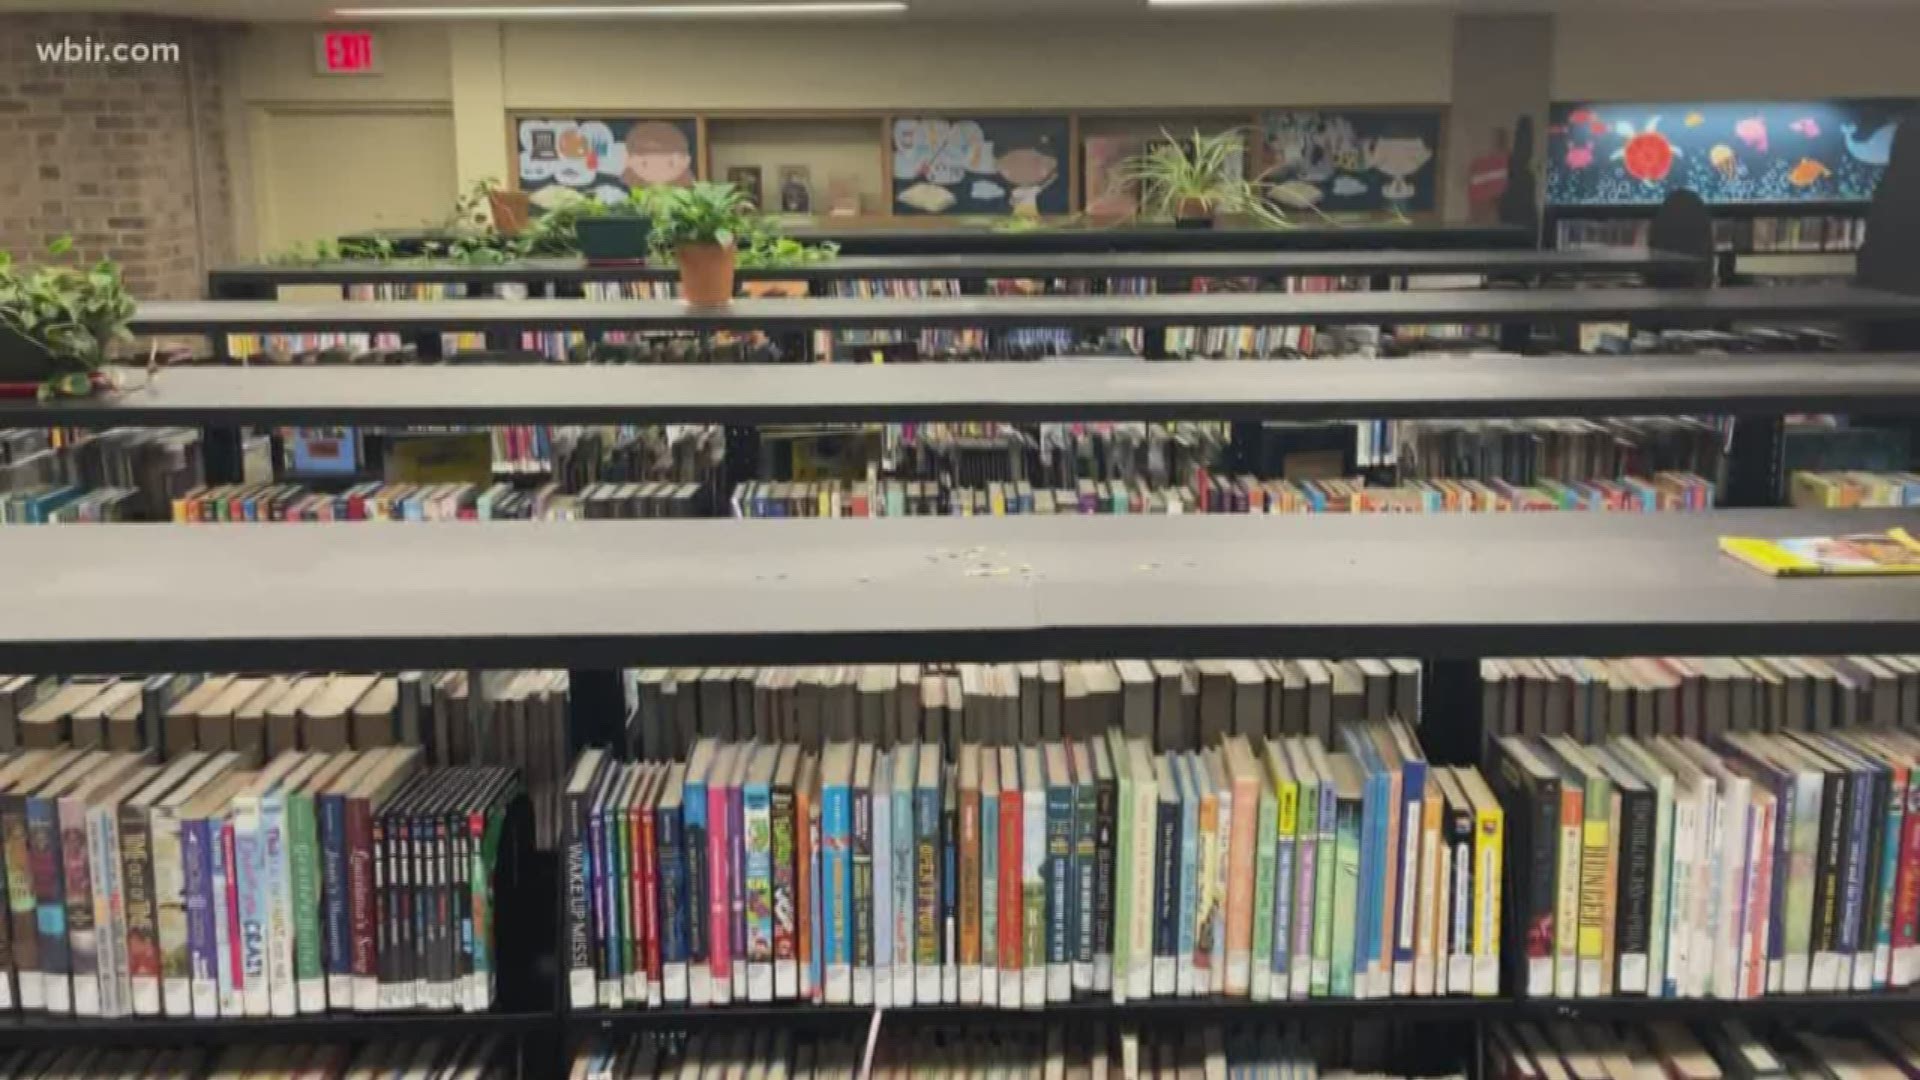 Under the bill, an elected board of five adults would make decisions on what material is sexually inappropriate for children in public libraries.